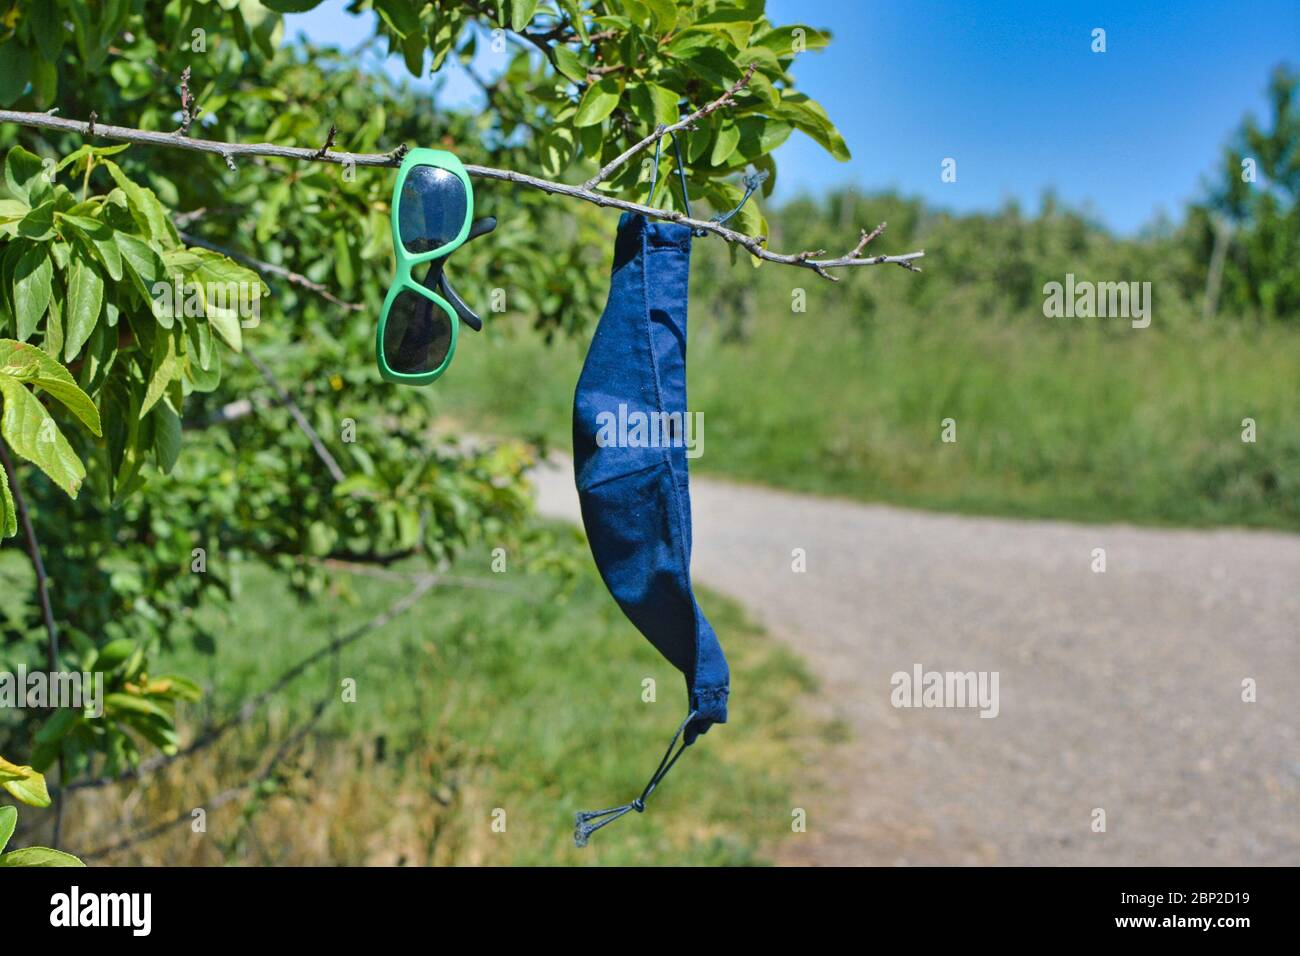 Abandoned protective face mask and sunglasses hanging in tree Stock Photo